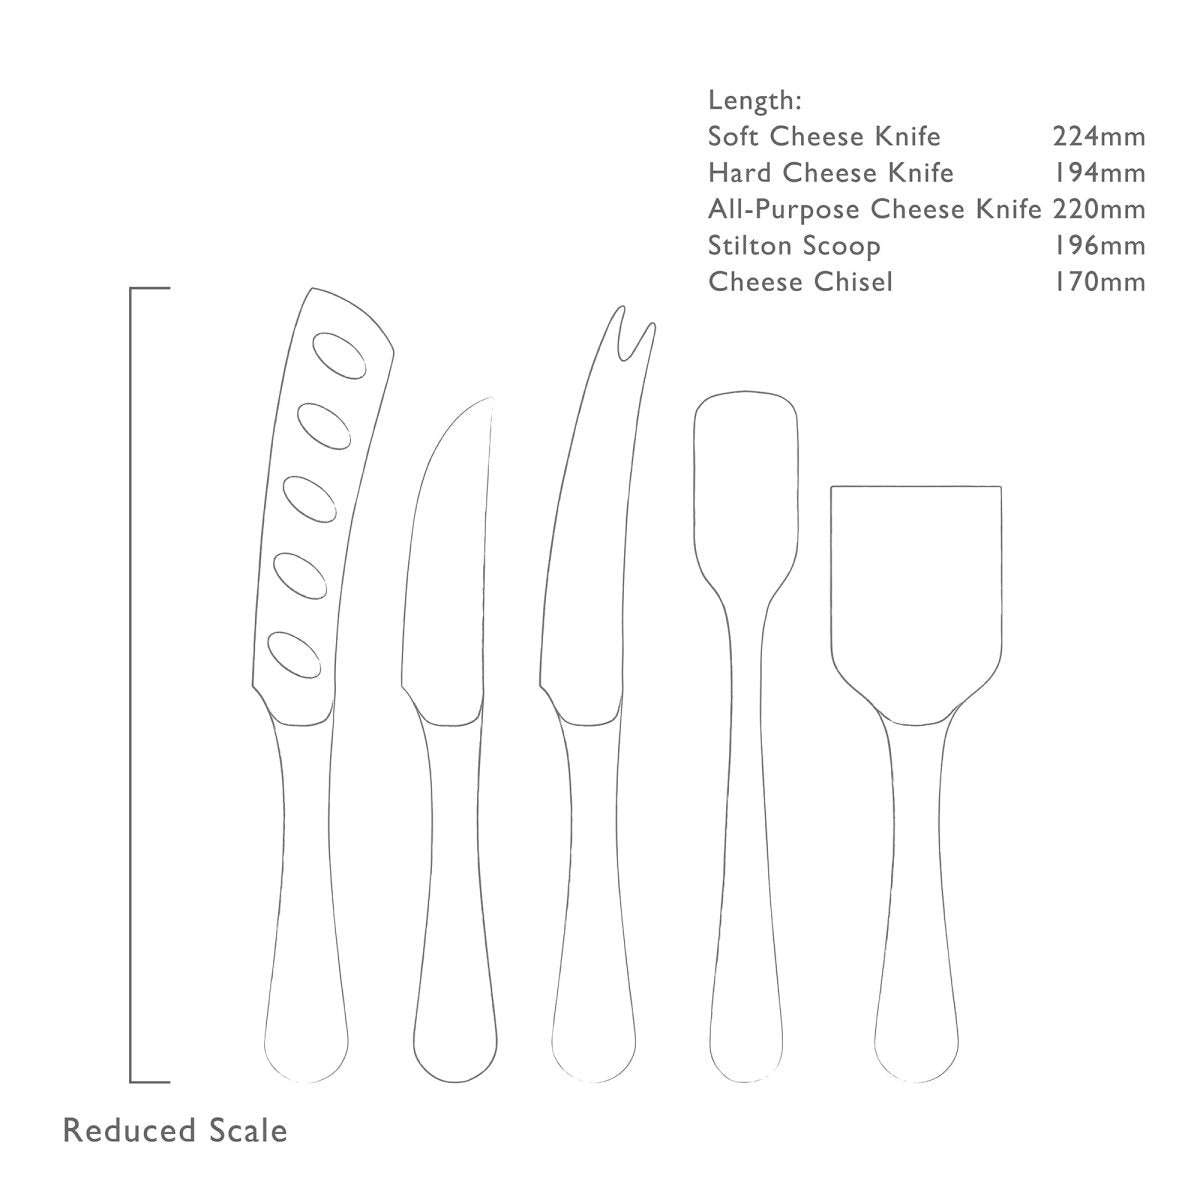 Robert Welch Gourmet Cheese Knife Set, 5 Piece. - RADBR1083V/5 - The Cotswold Knife Company